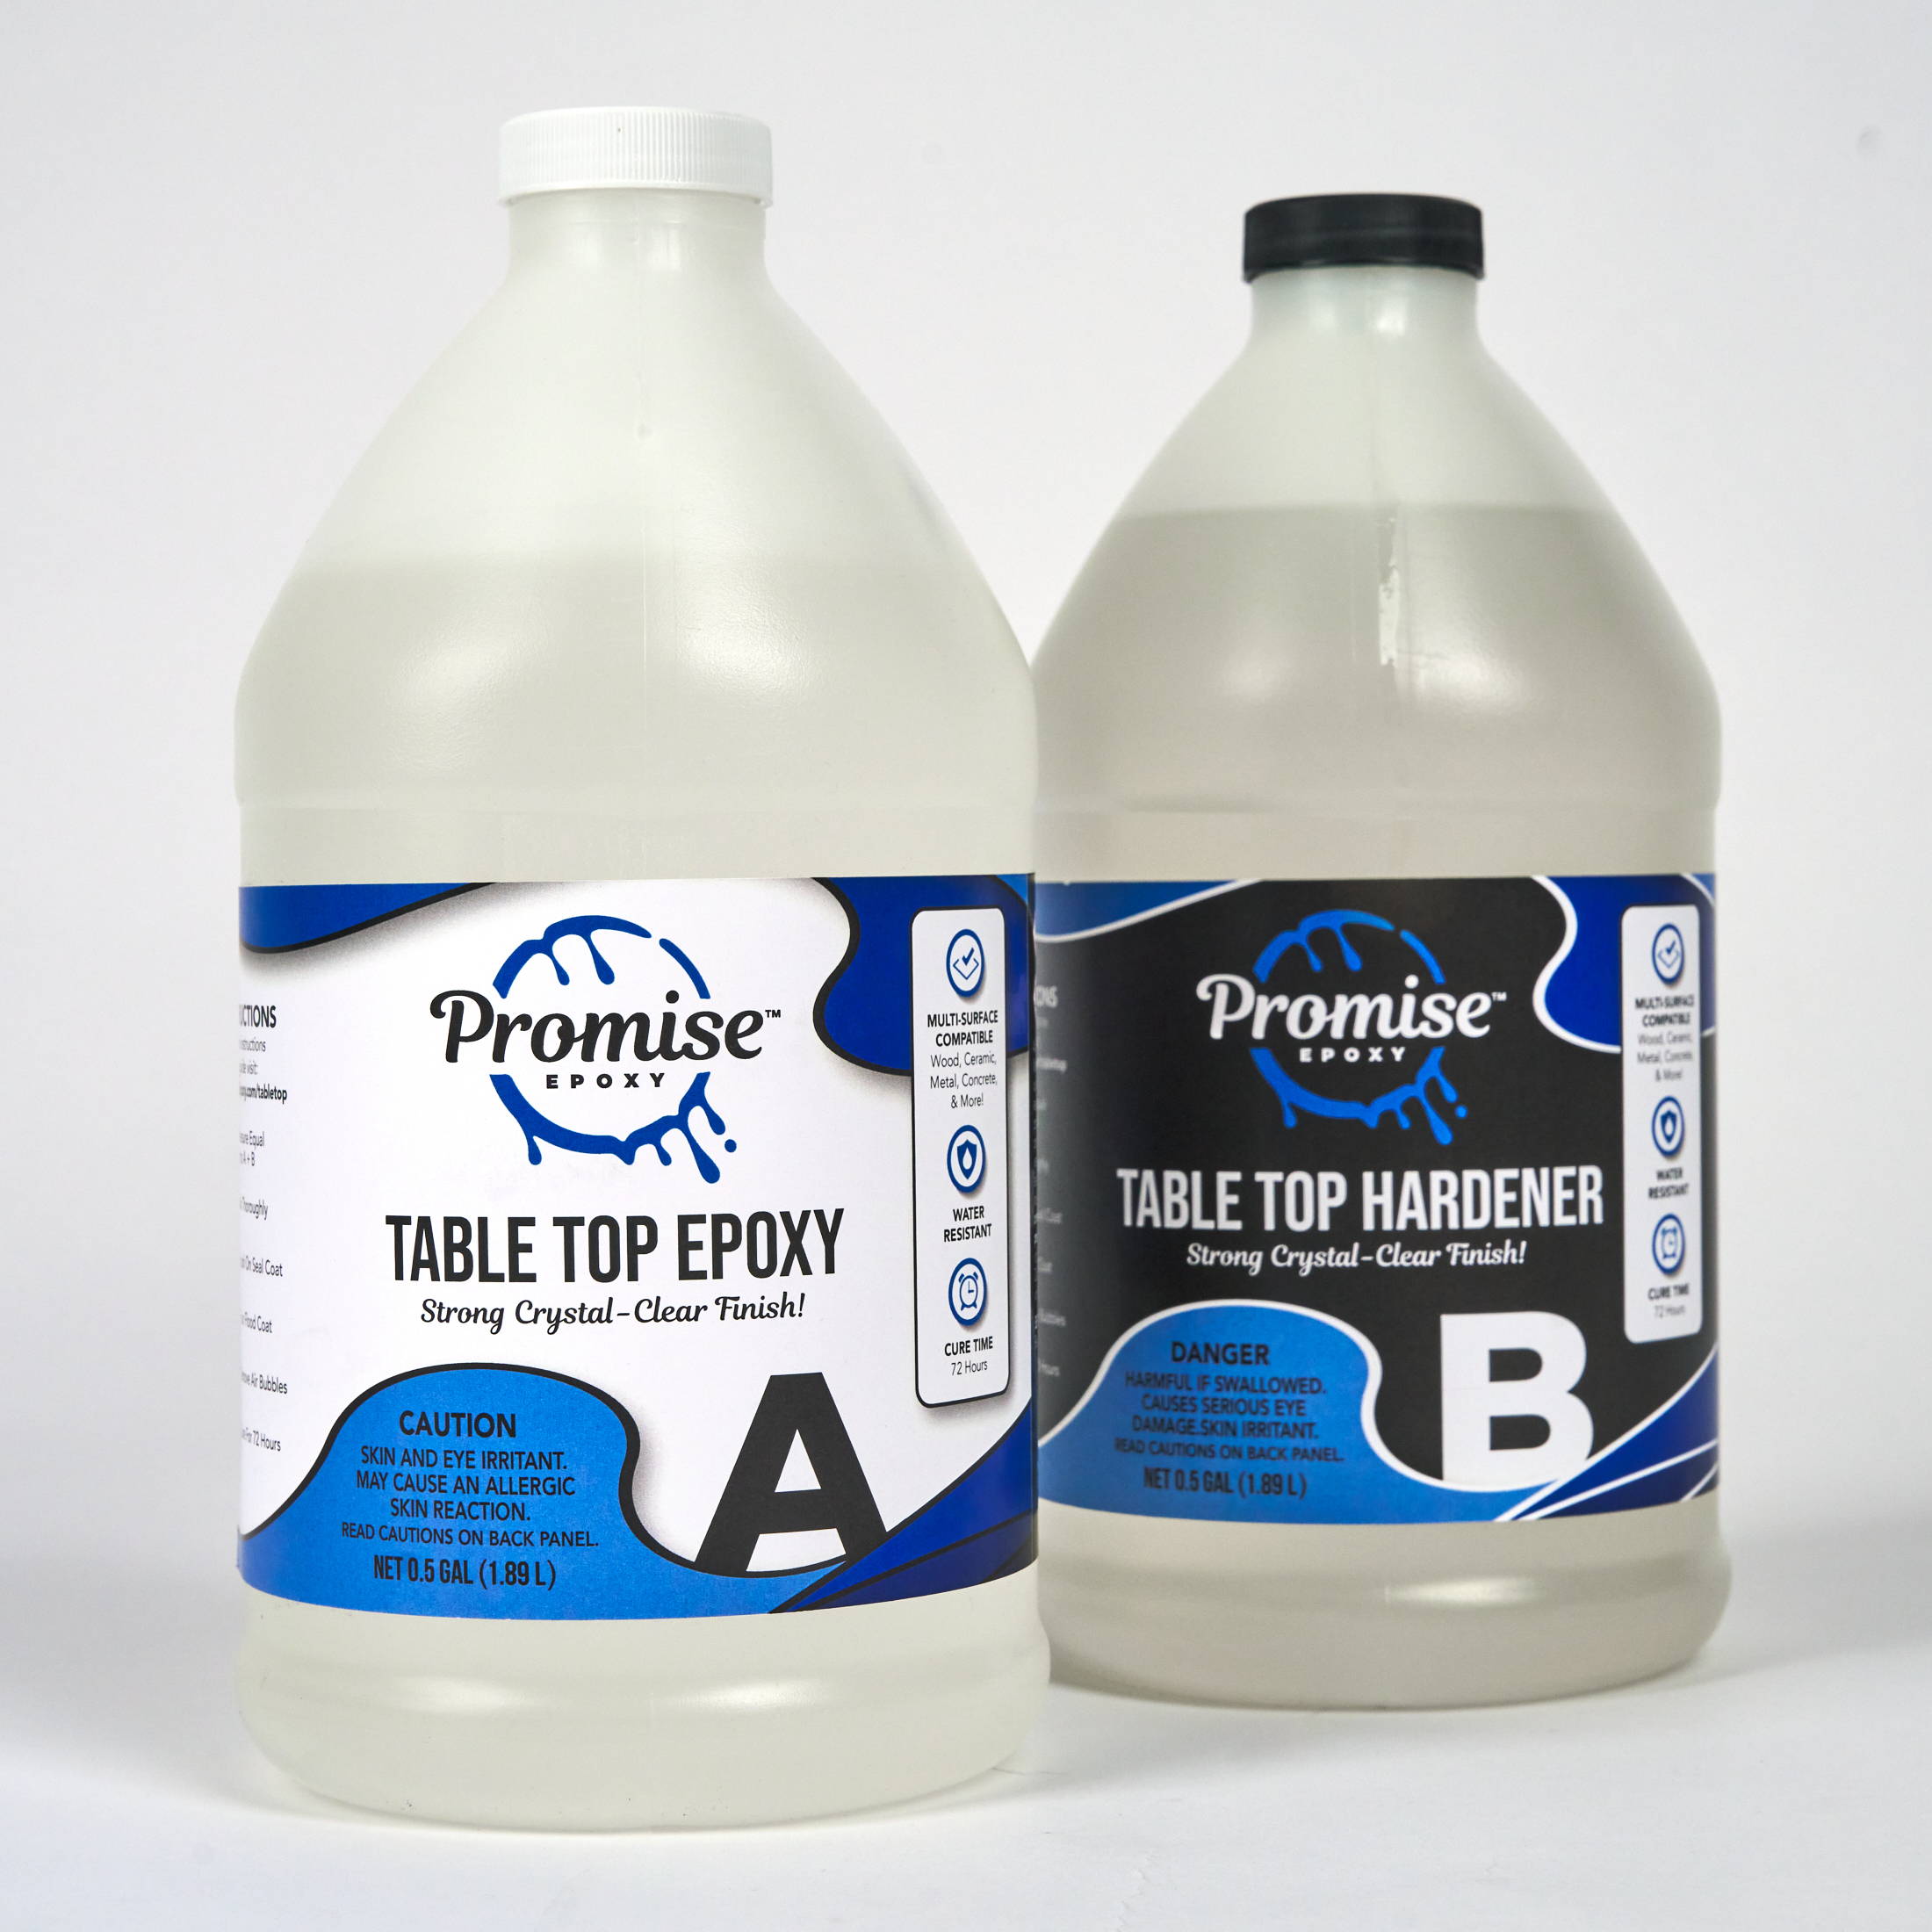 promise table top epoxy bottles part a and part b